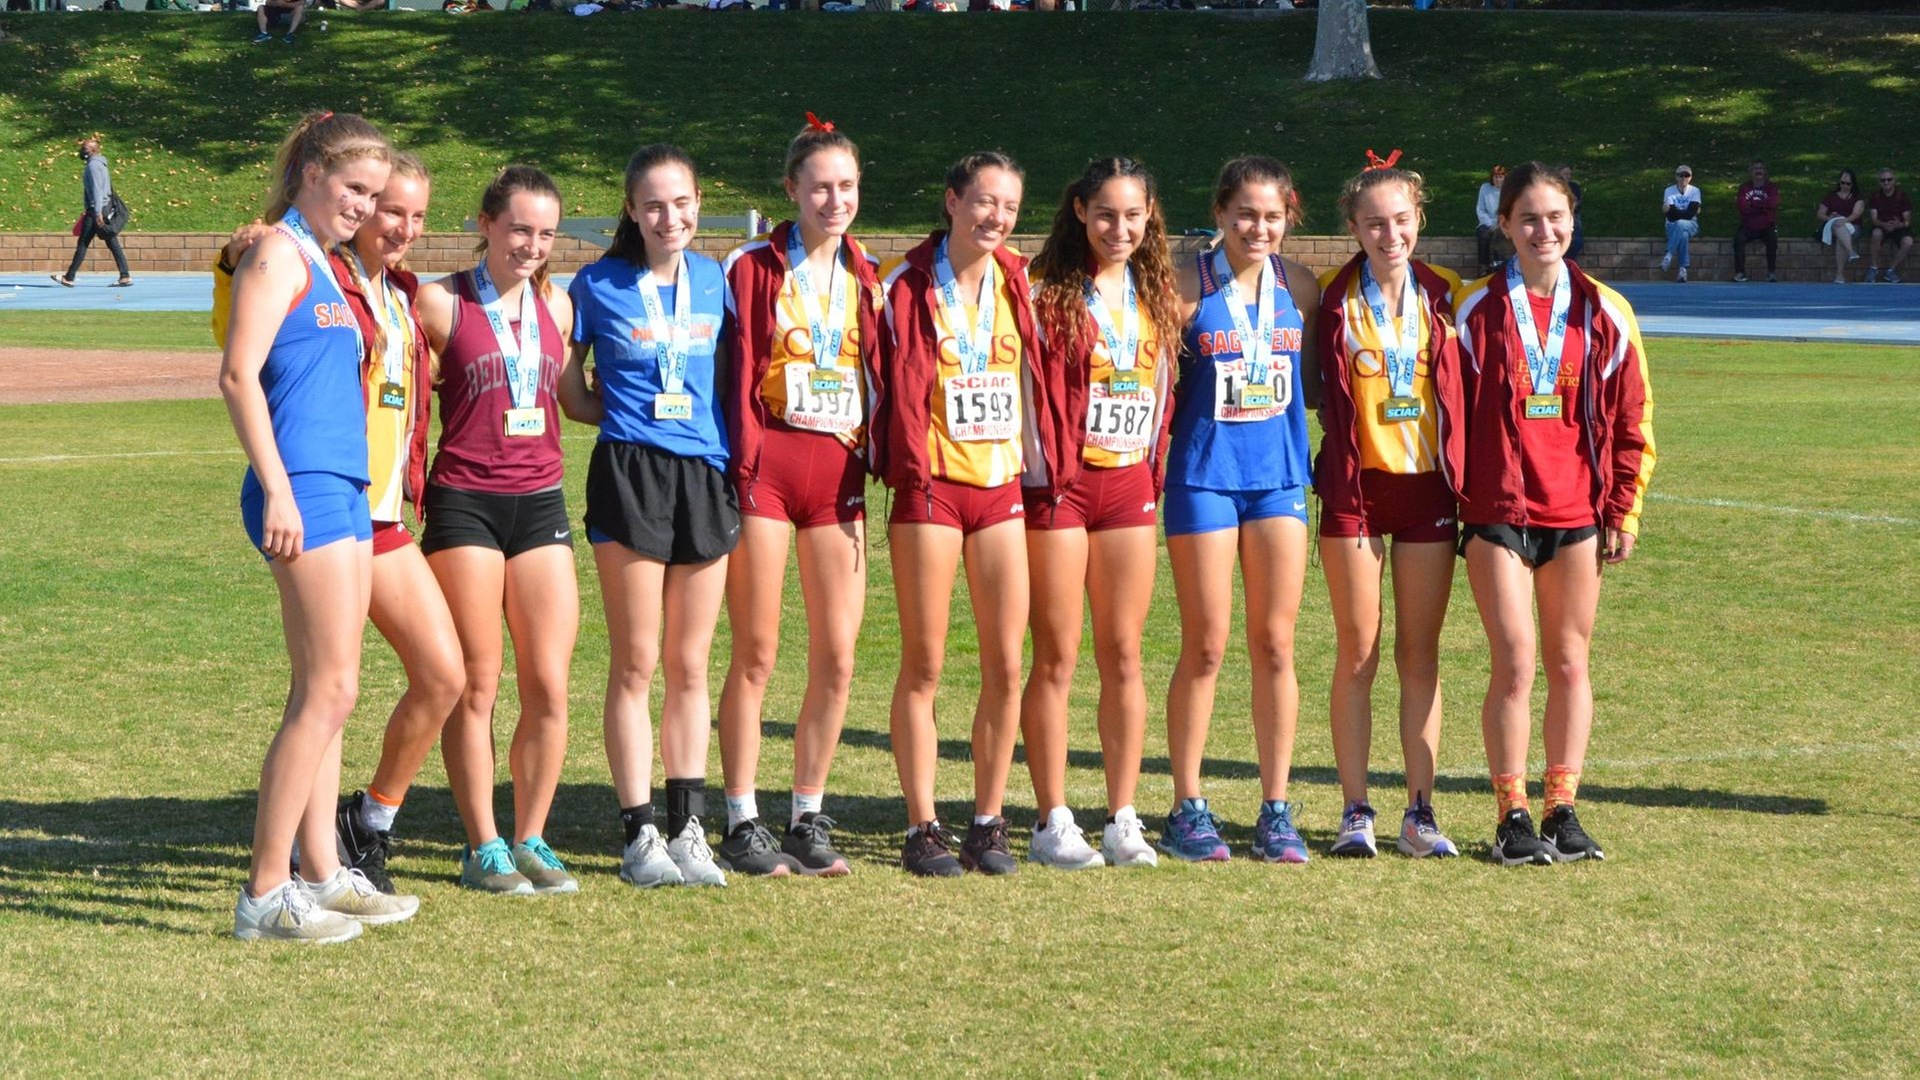 CMS had 6 of the 10 first-team All-SCIAC winners